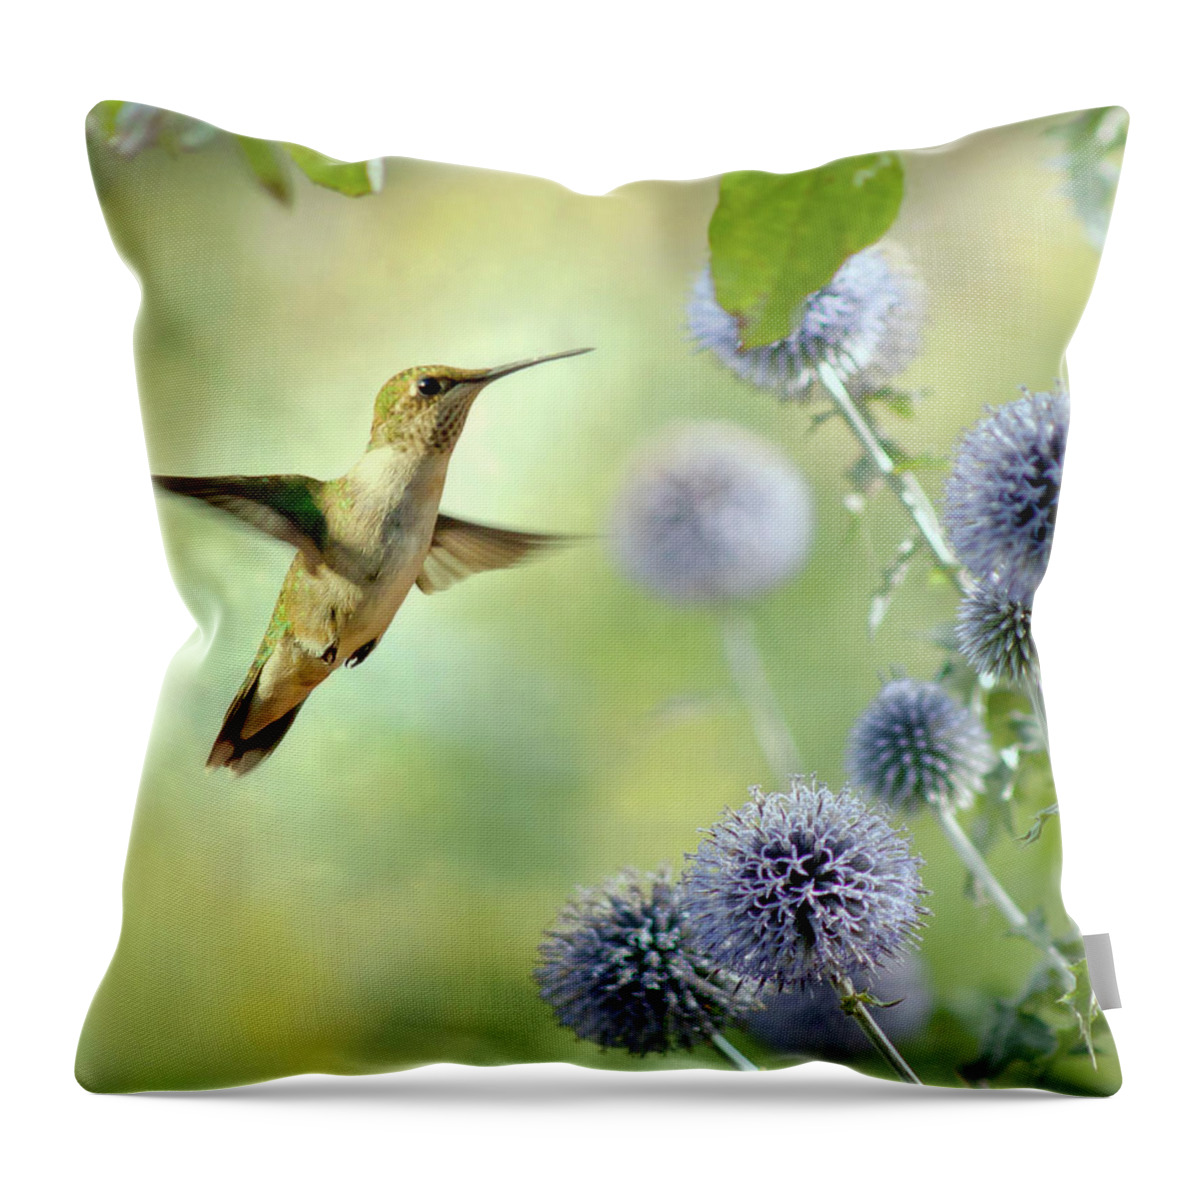 Animal Themes Throw Pillow featuring the photograph Hovering Hummingbird by Nancy Rose